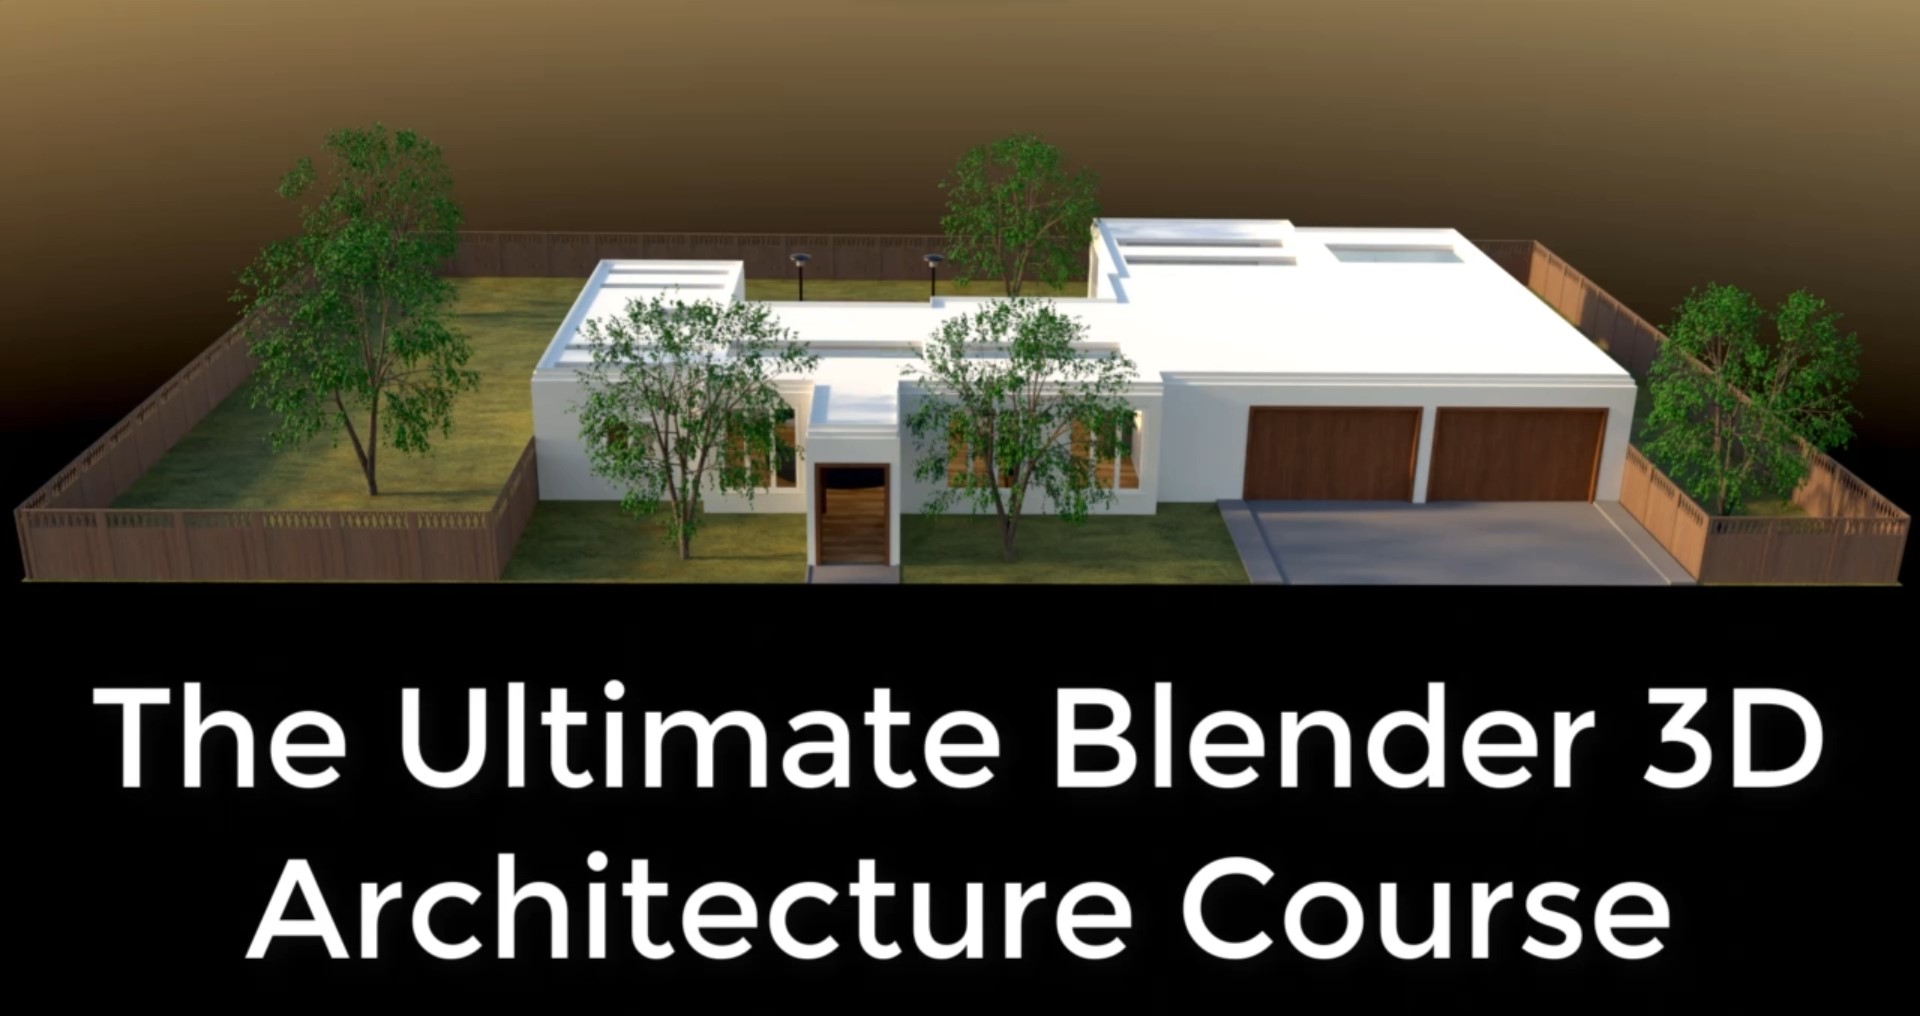 The Ultimate Blender 3D Architecture Course